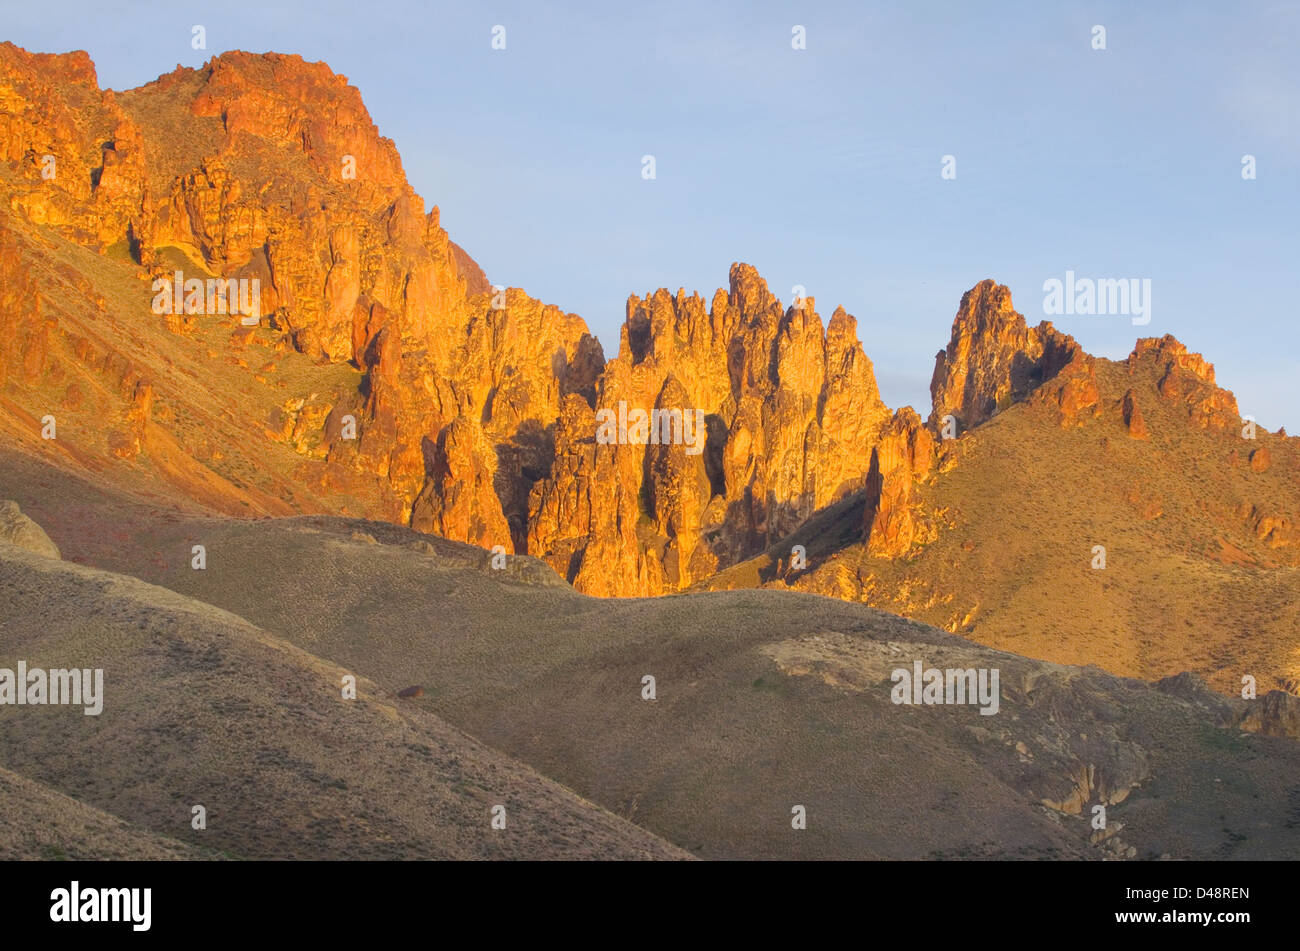 Spires and rock formations made of volcanic tuff in Leslie Gulch in the Owyhee Uplands of SE Oregon Stock Photo